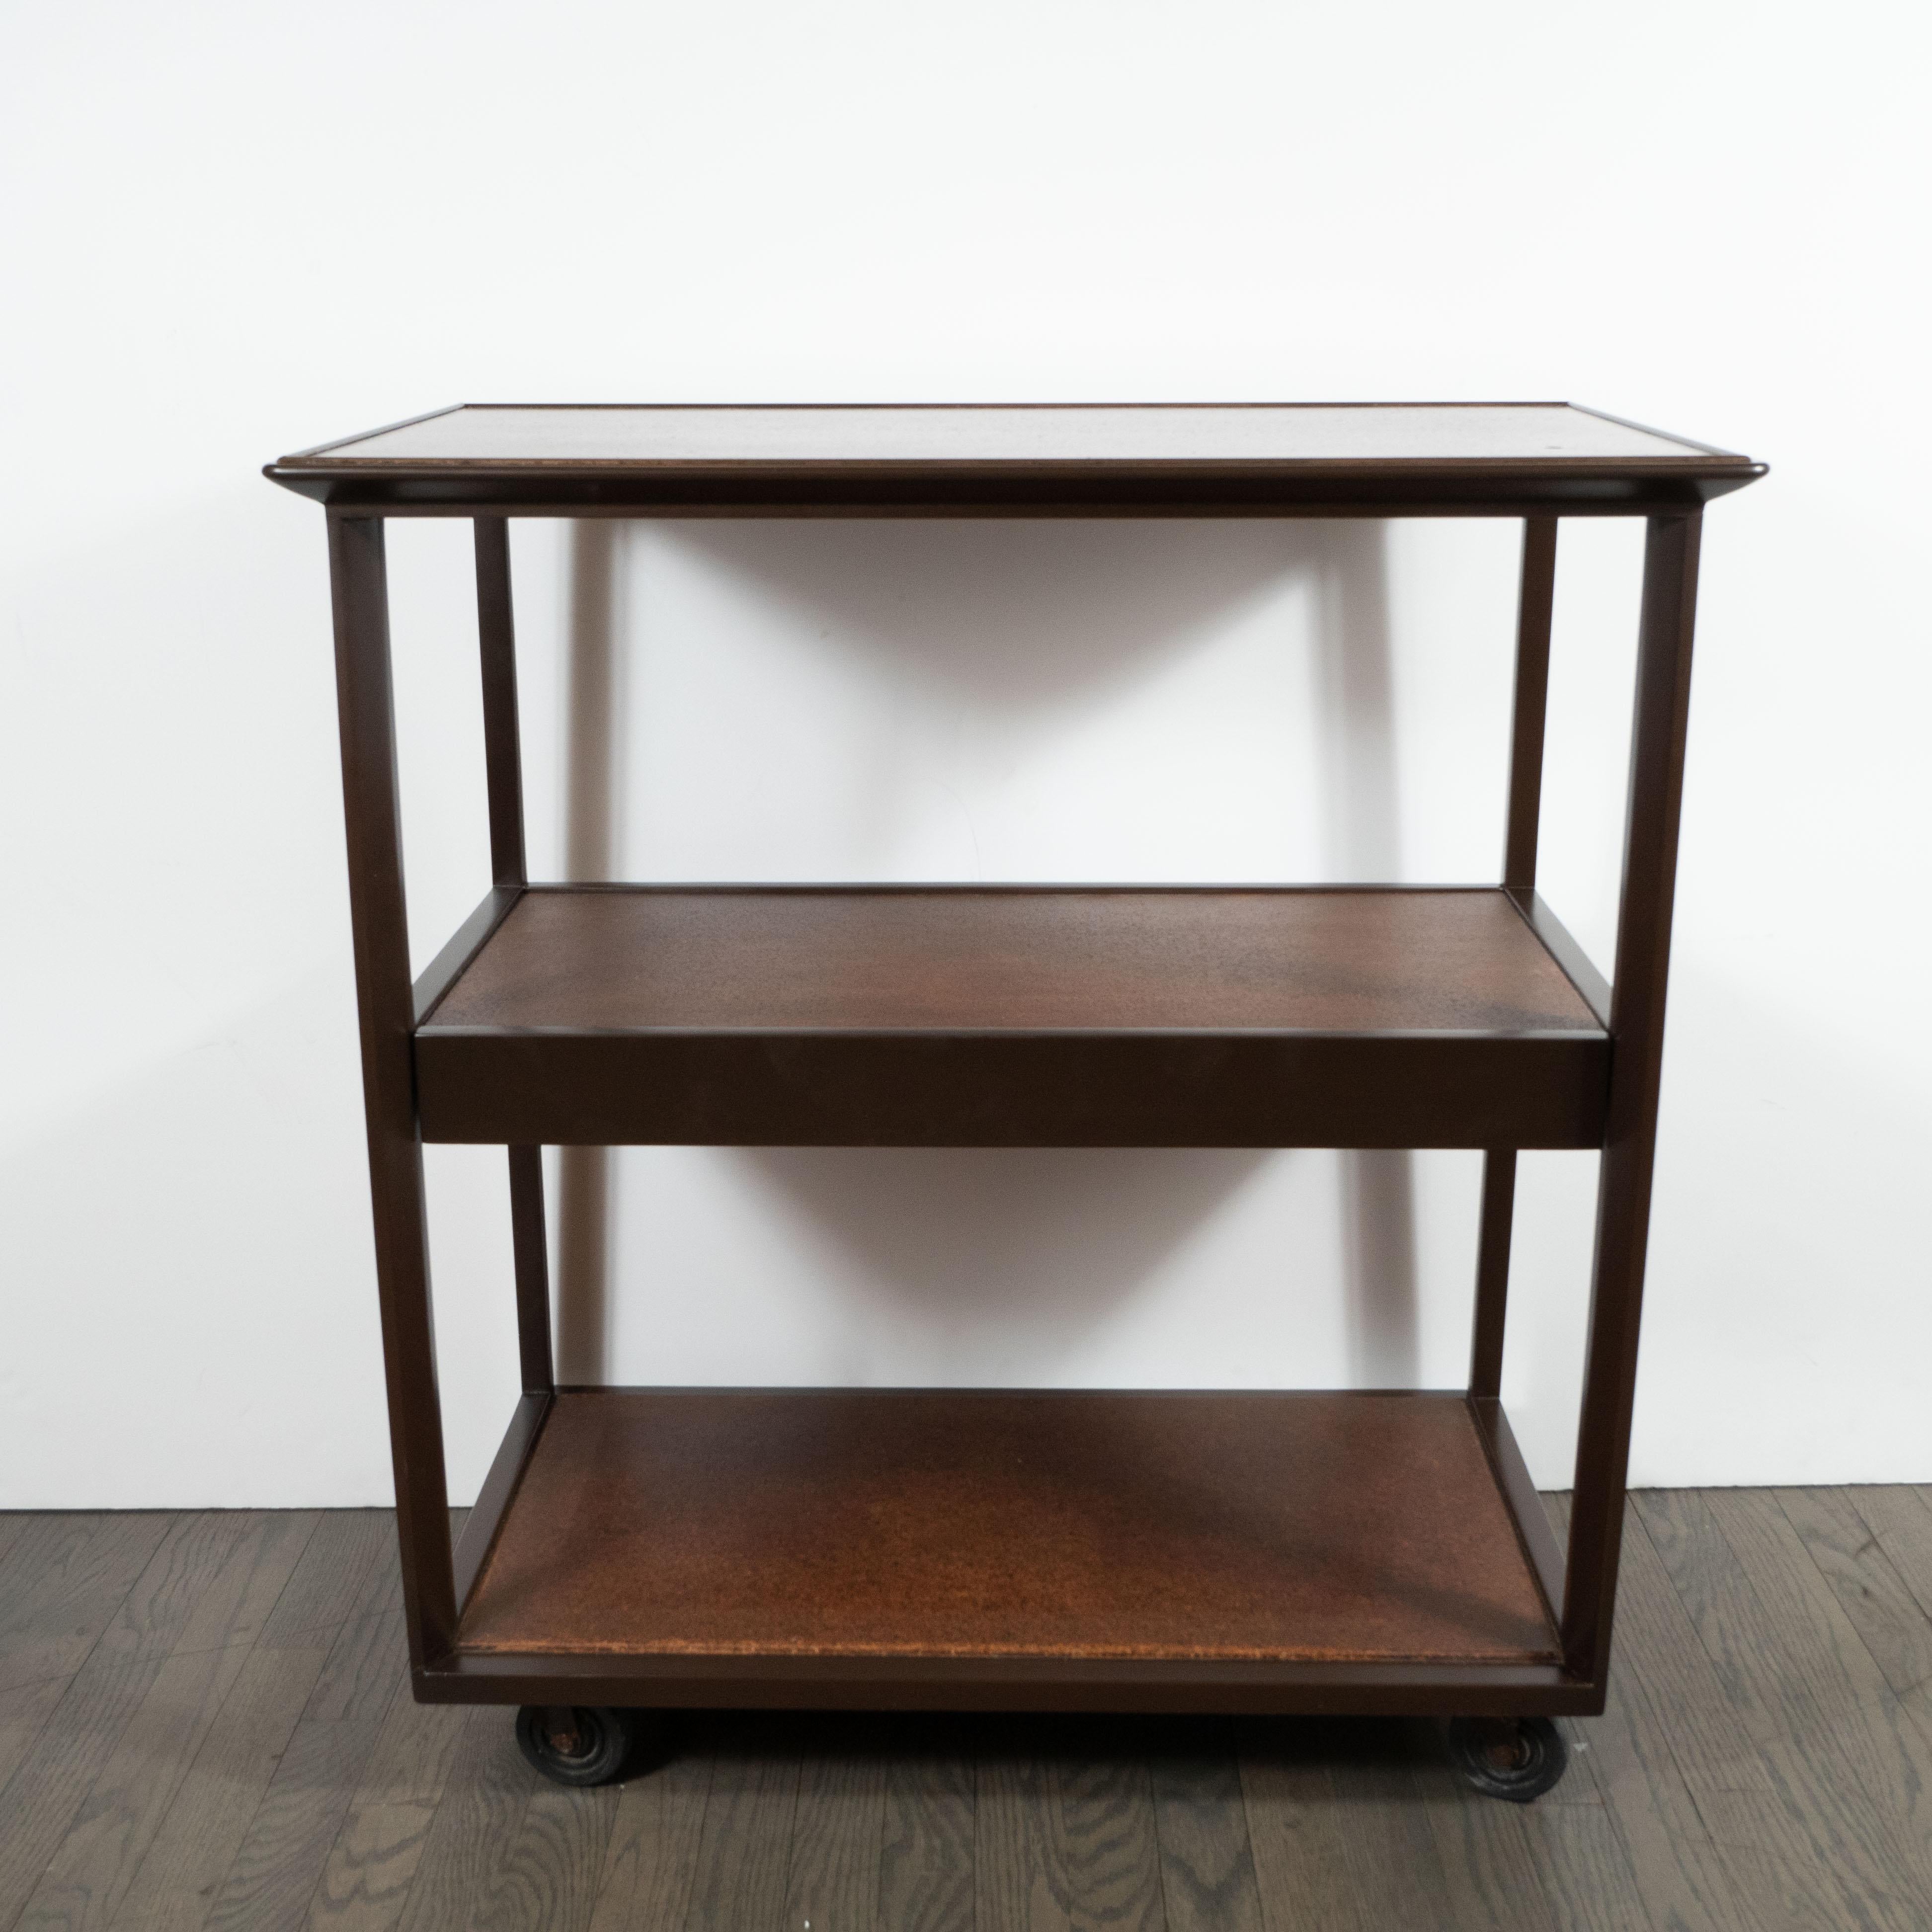 This refined bar cart was designed by the illustrious American firm Dunbar, and handmade in Berne, Indiana, circa 1960. It features three rectangular tiers in with tawny brown centers and ebonized walnut perimeters. There is a drawer that pulls out